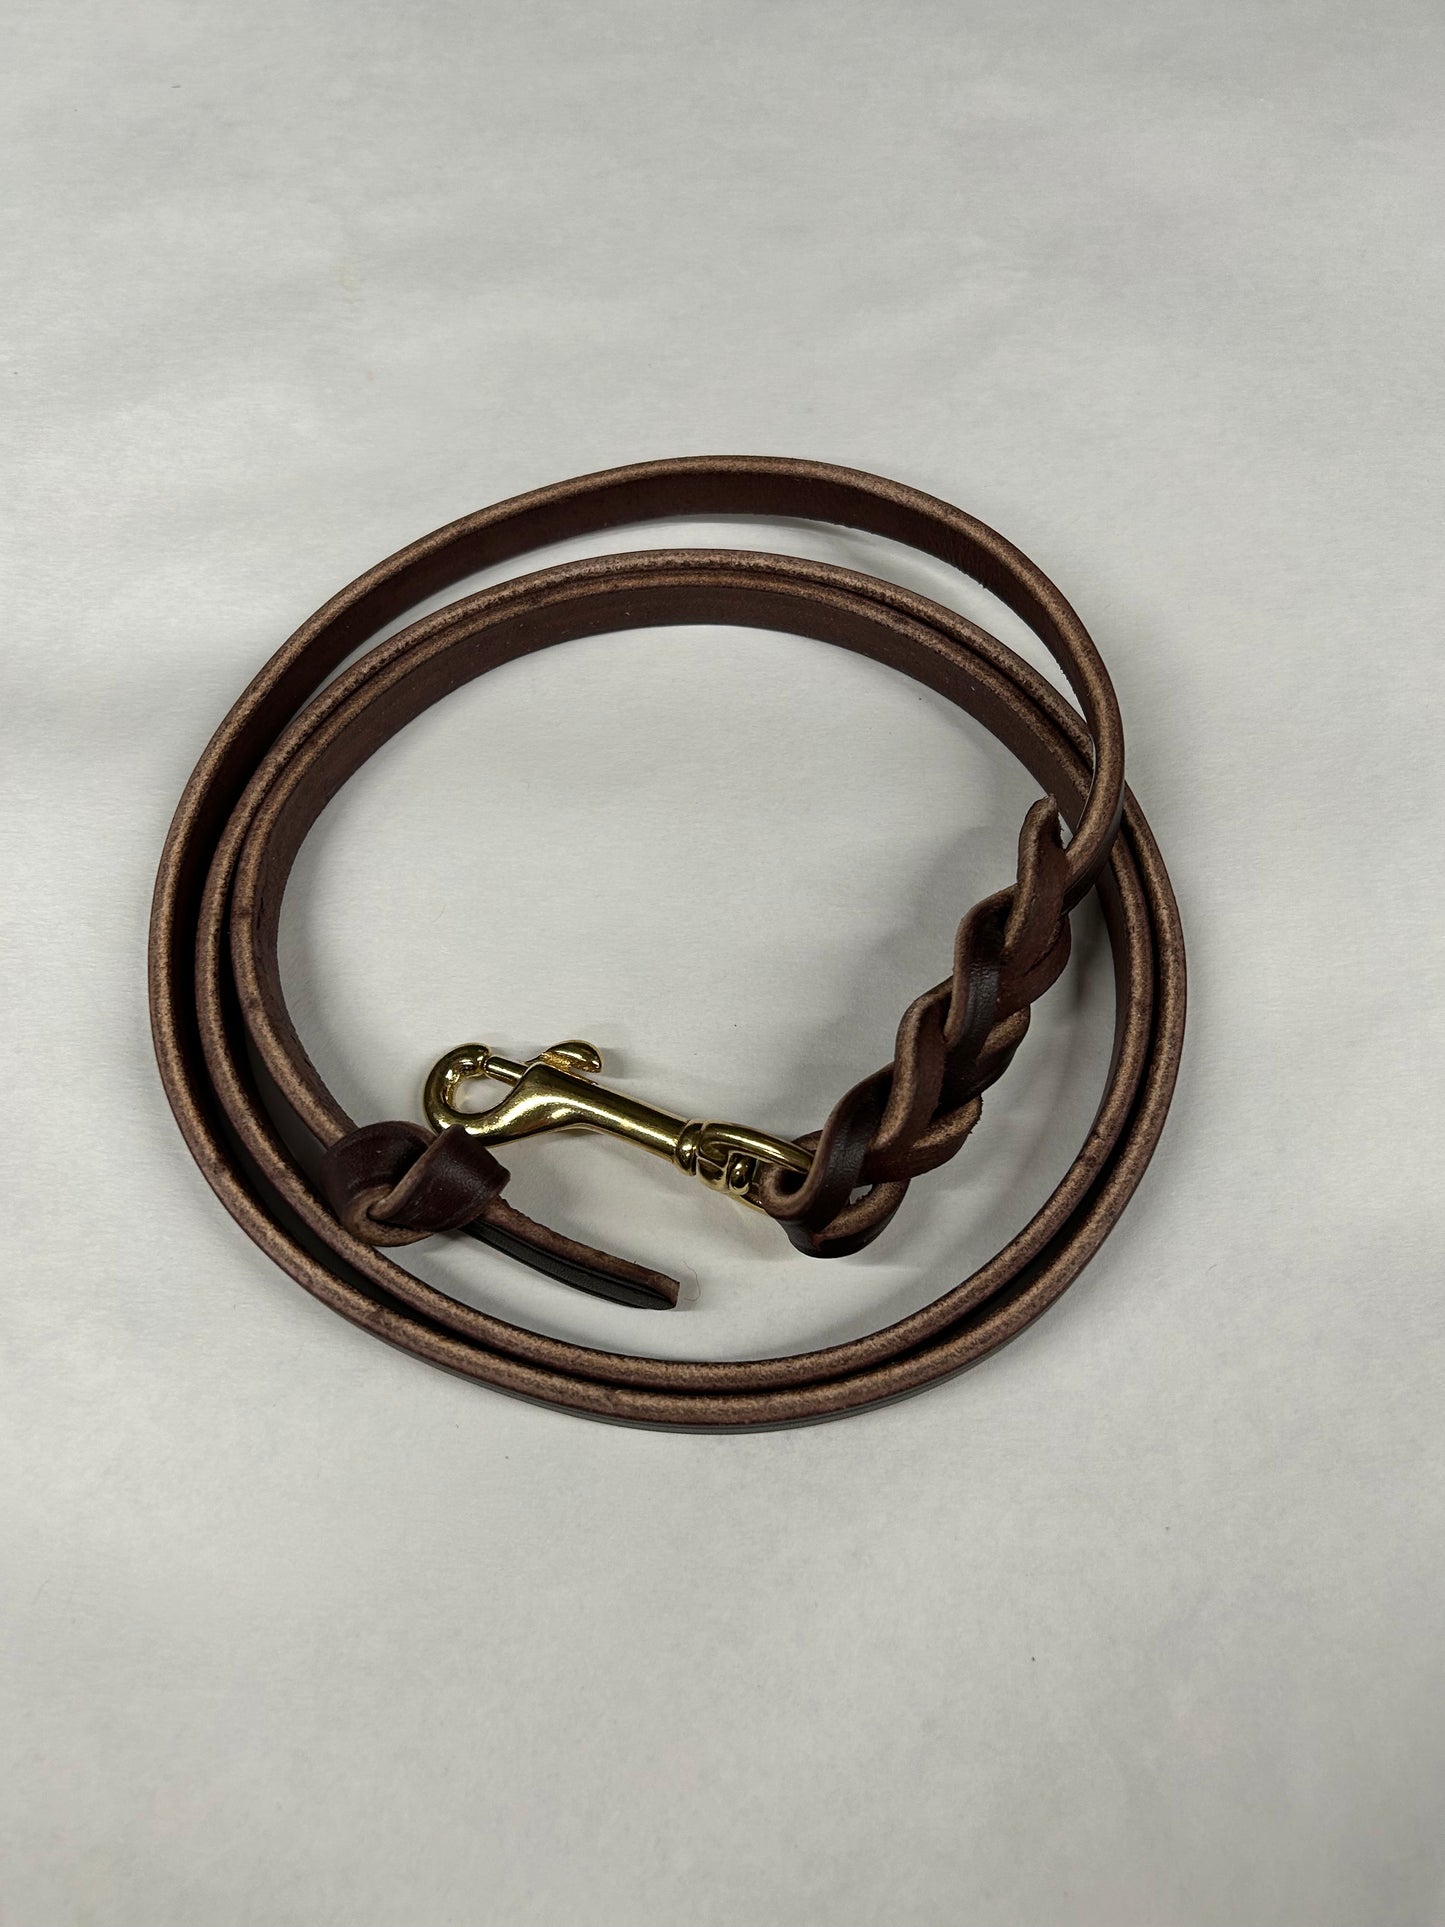 5ft x 1/2in braided leather leash with knot (brown)